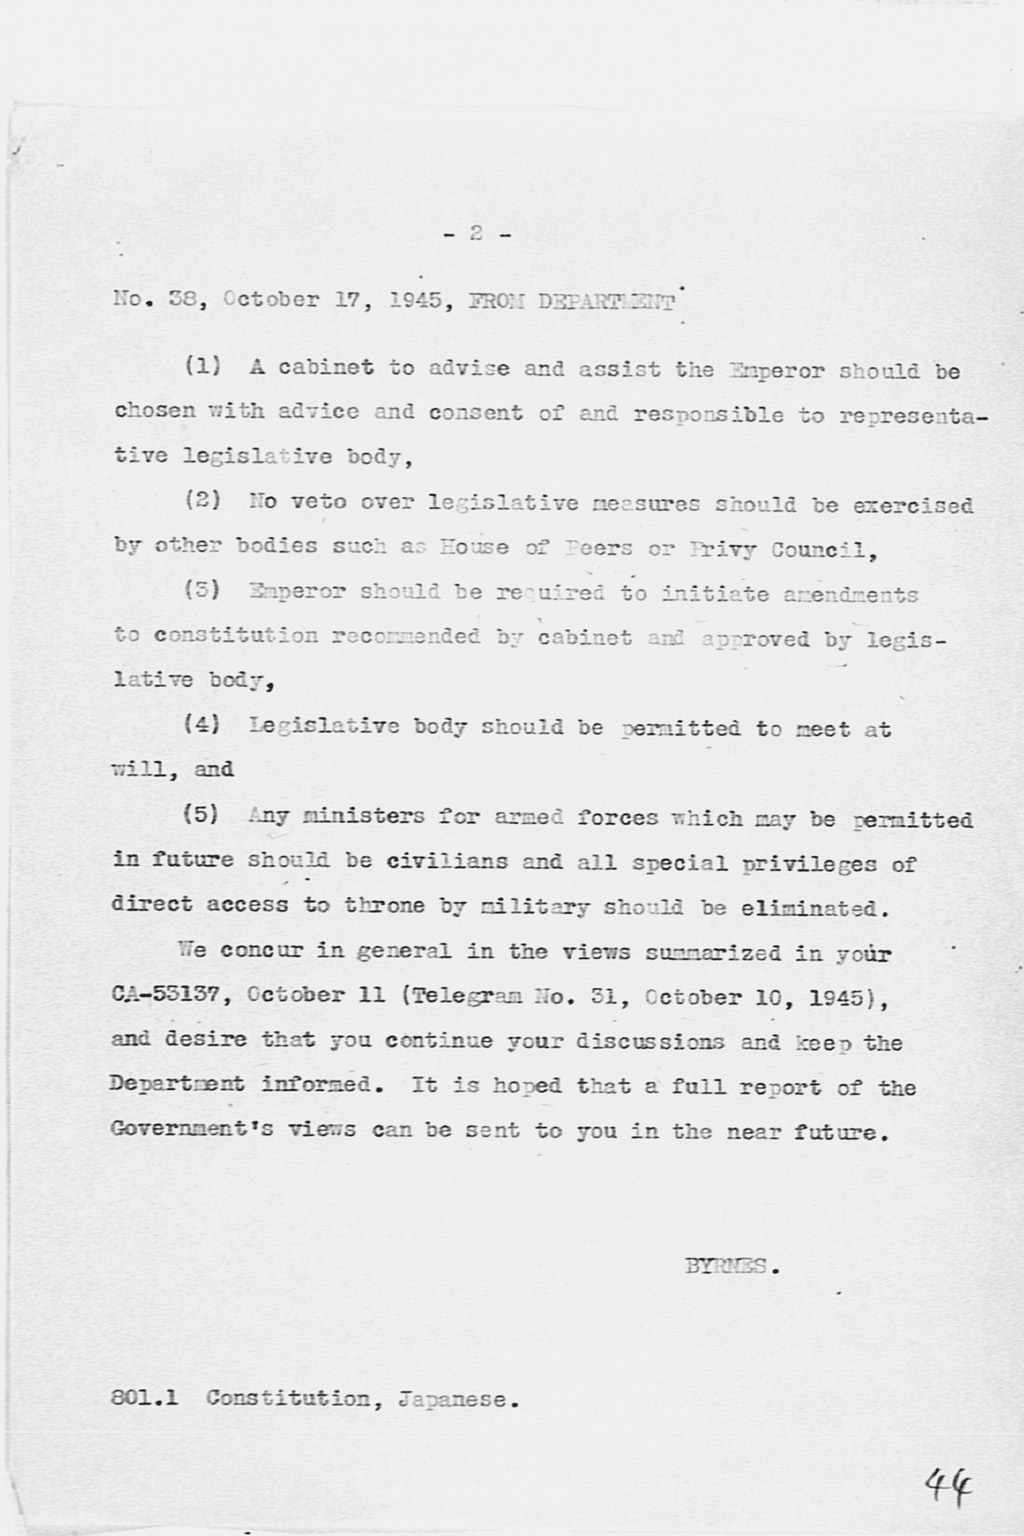 [Telegram Received From: Secretary of State dated October 17, 1945.](Larger image)